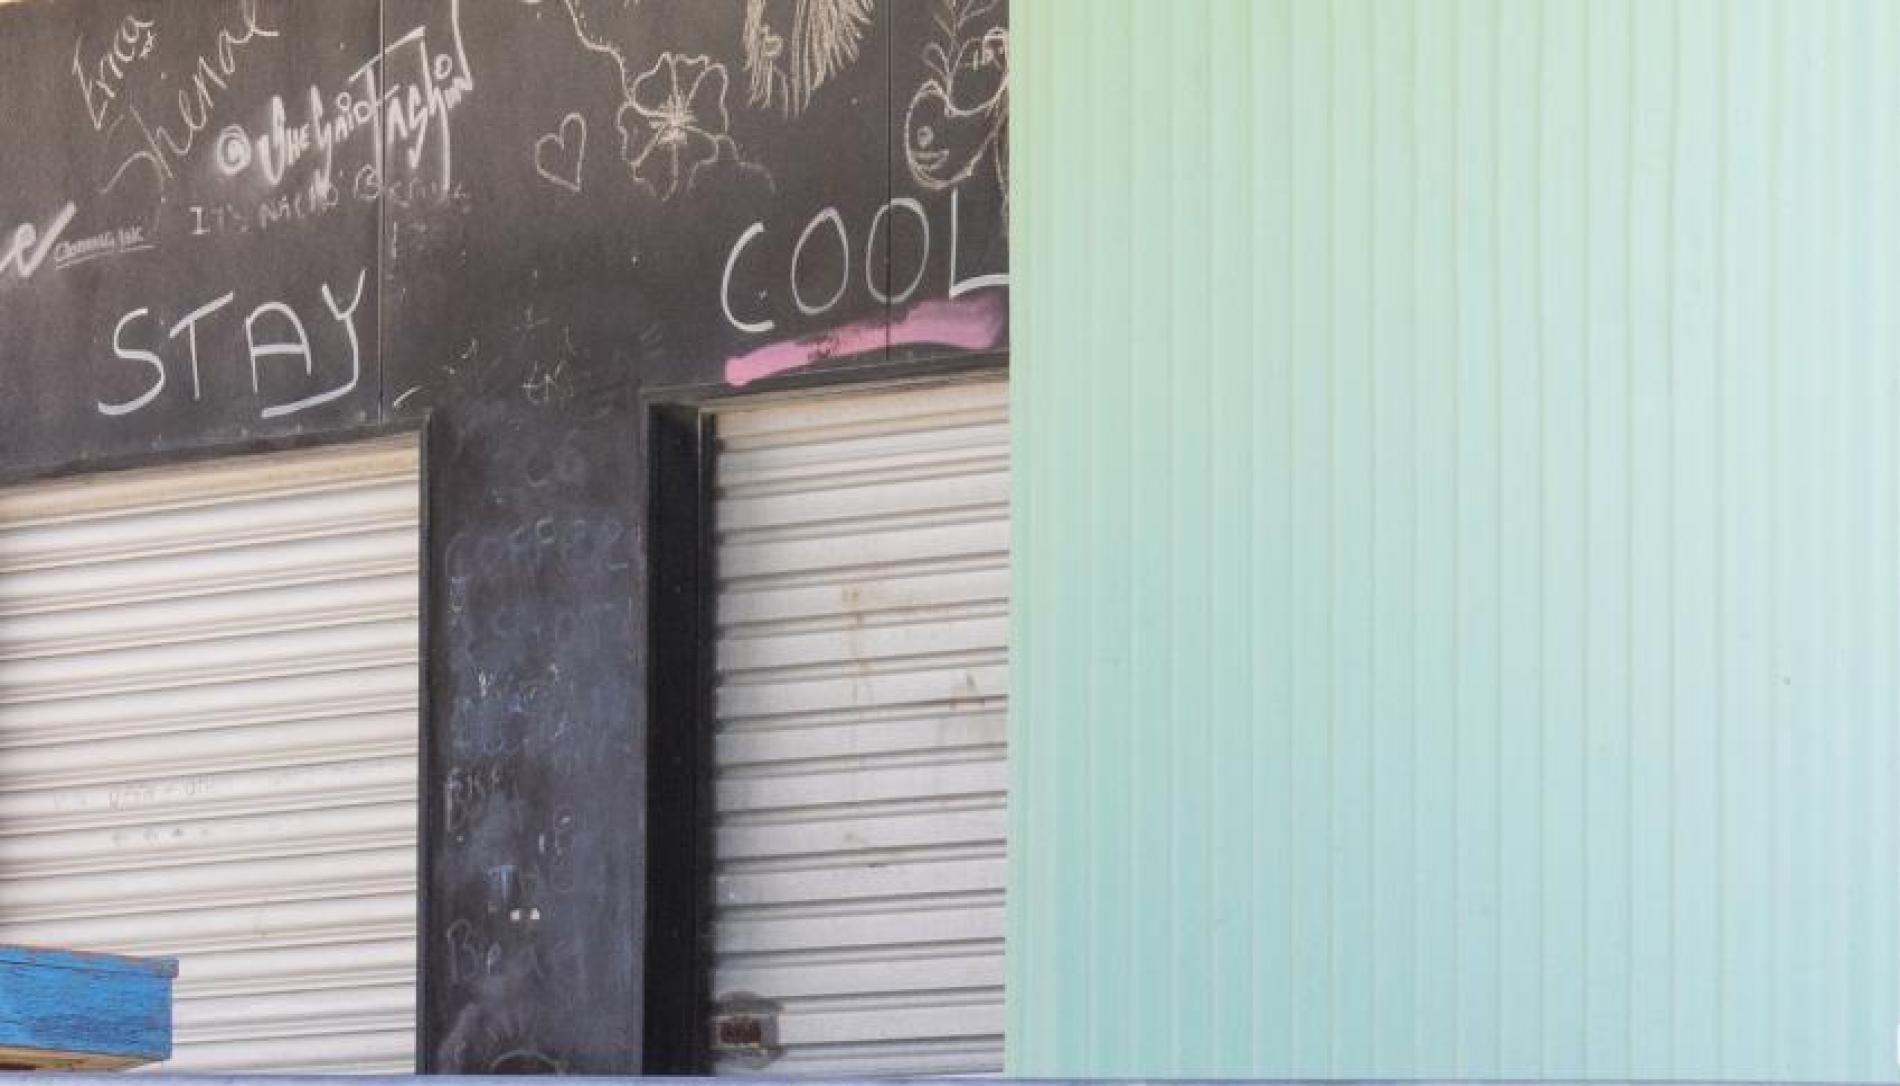 Photograph: Behind a blue wall, is a black wall with two garage doors. Above the doors is graffiti including the words 'STAY COOL' in upper case.